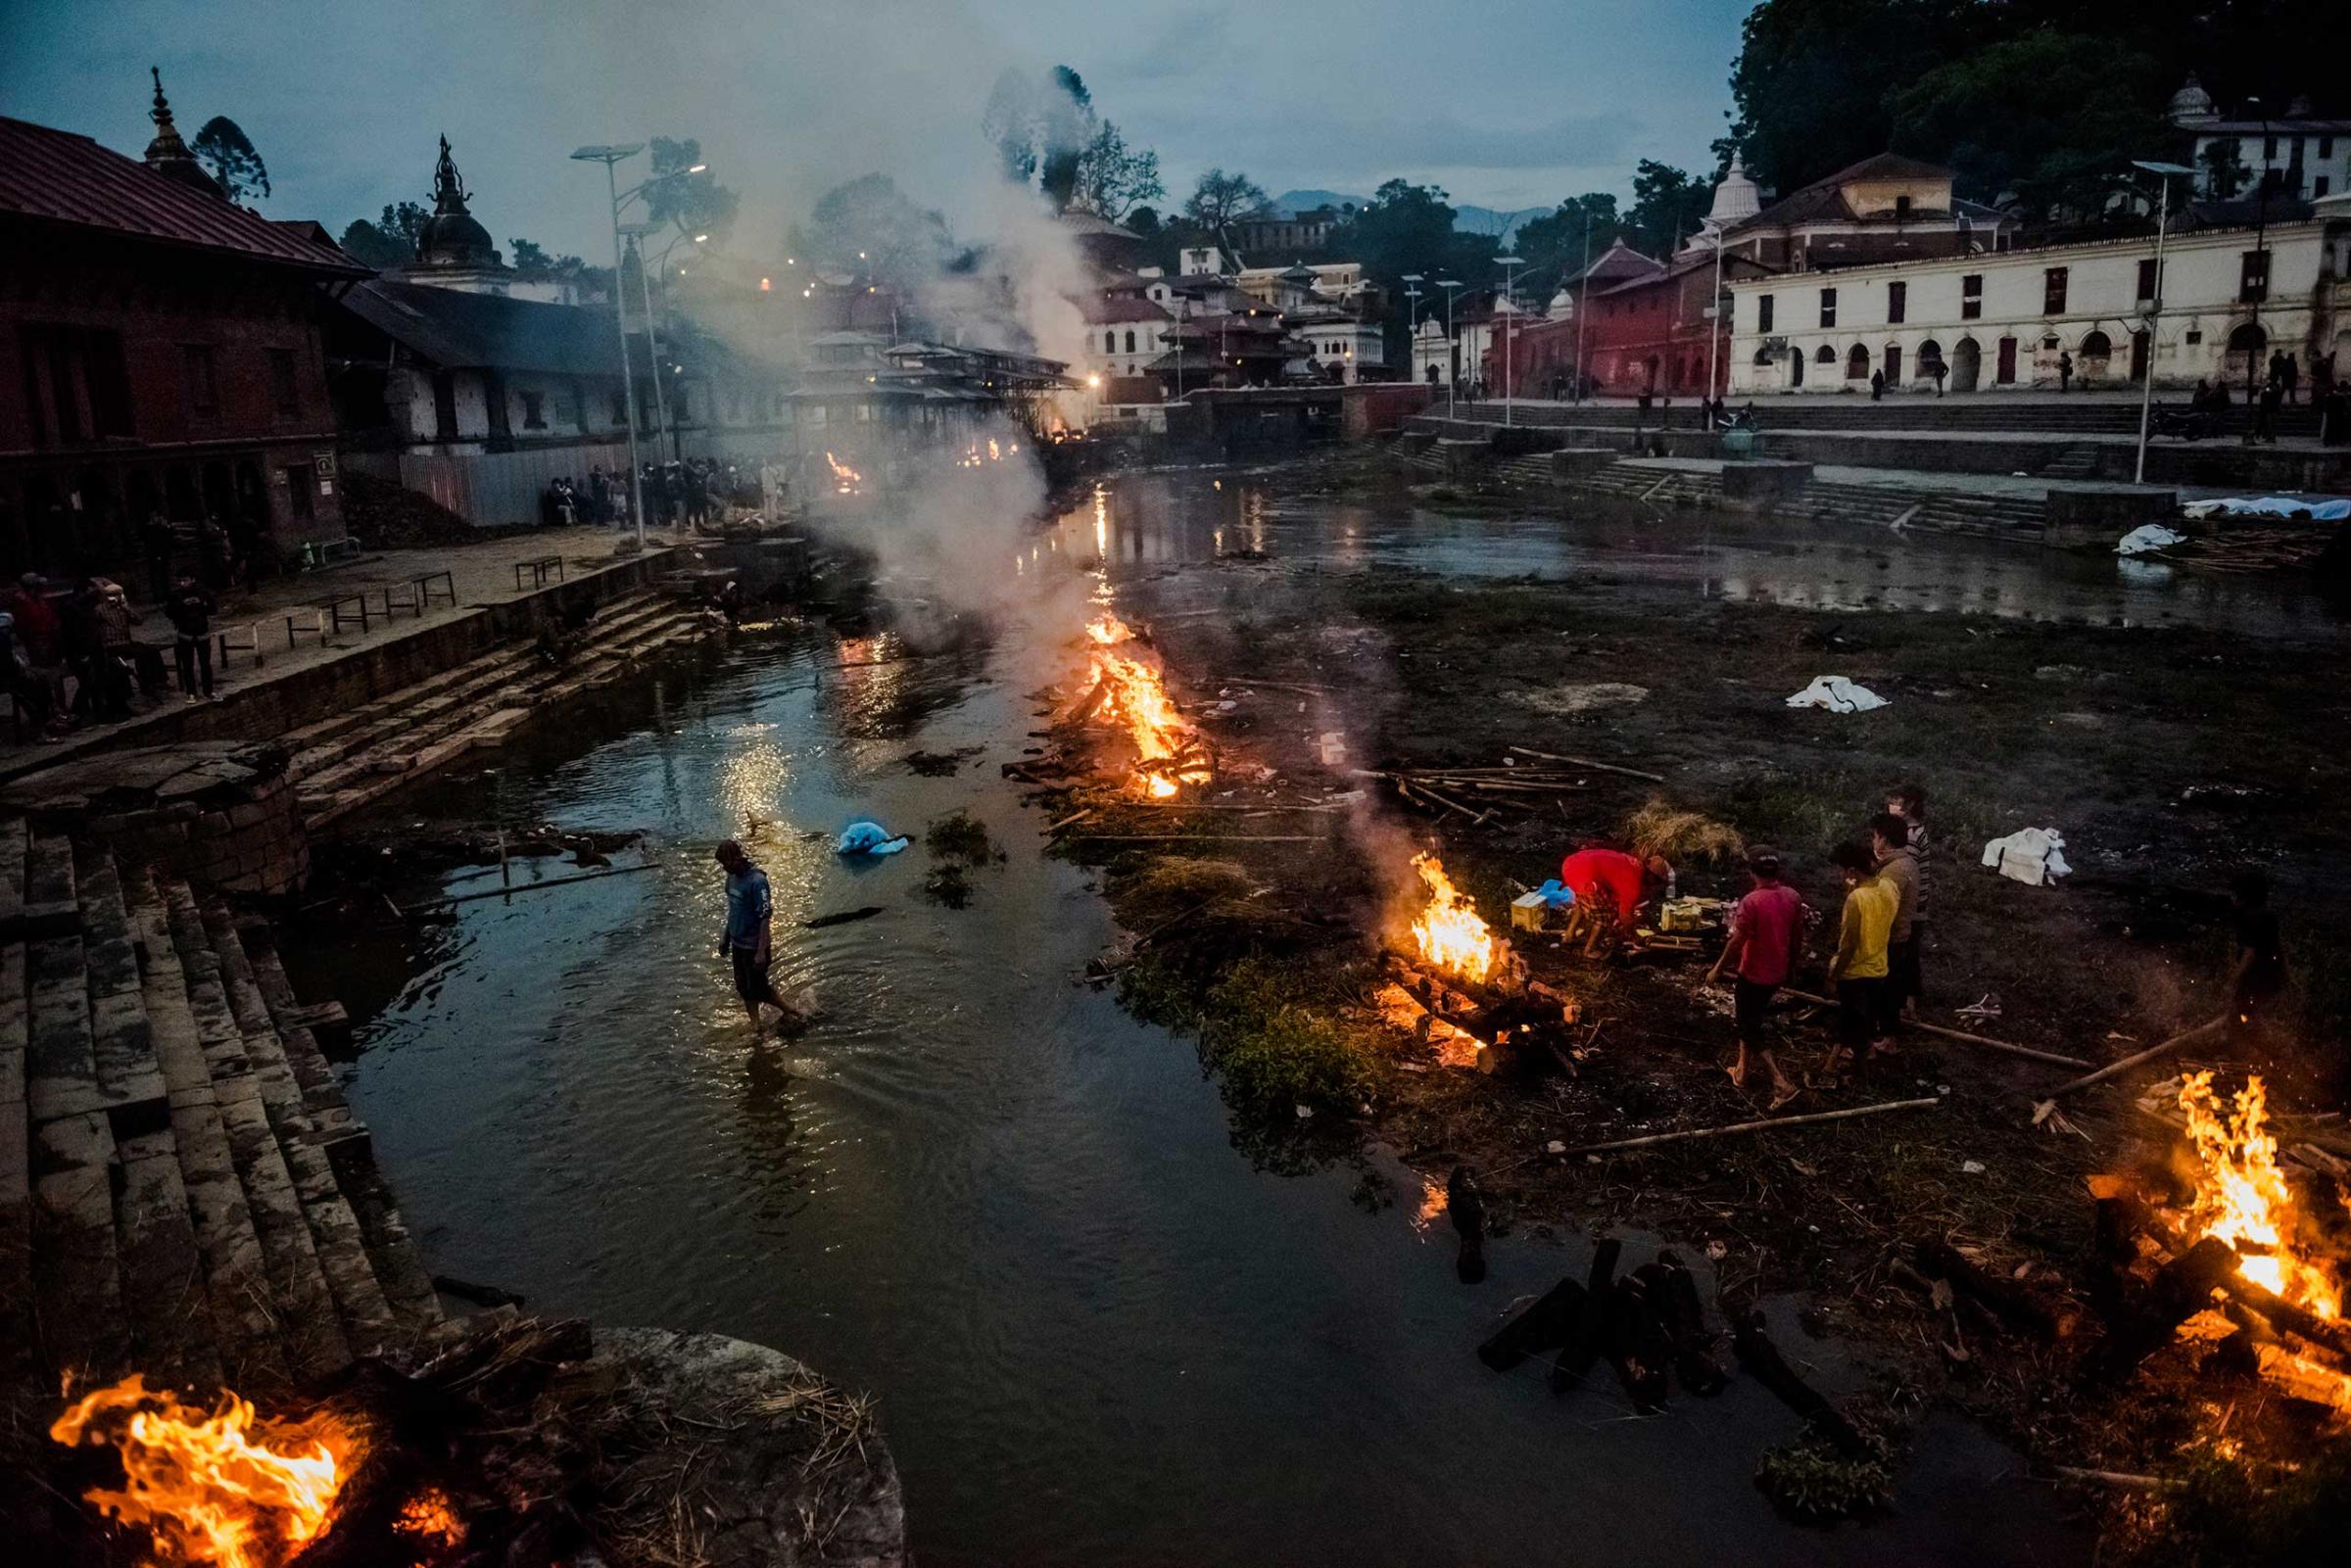 Flames rise from funeral pyres during the cremation of earthquake victims at the Pashupatinath Temple on the banks of Bagmati River, a sacred Hindu cremation site in Kathmandu, Nepal. April 28, 2015.